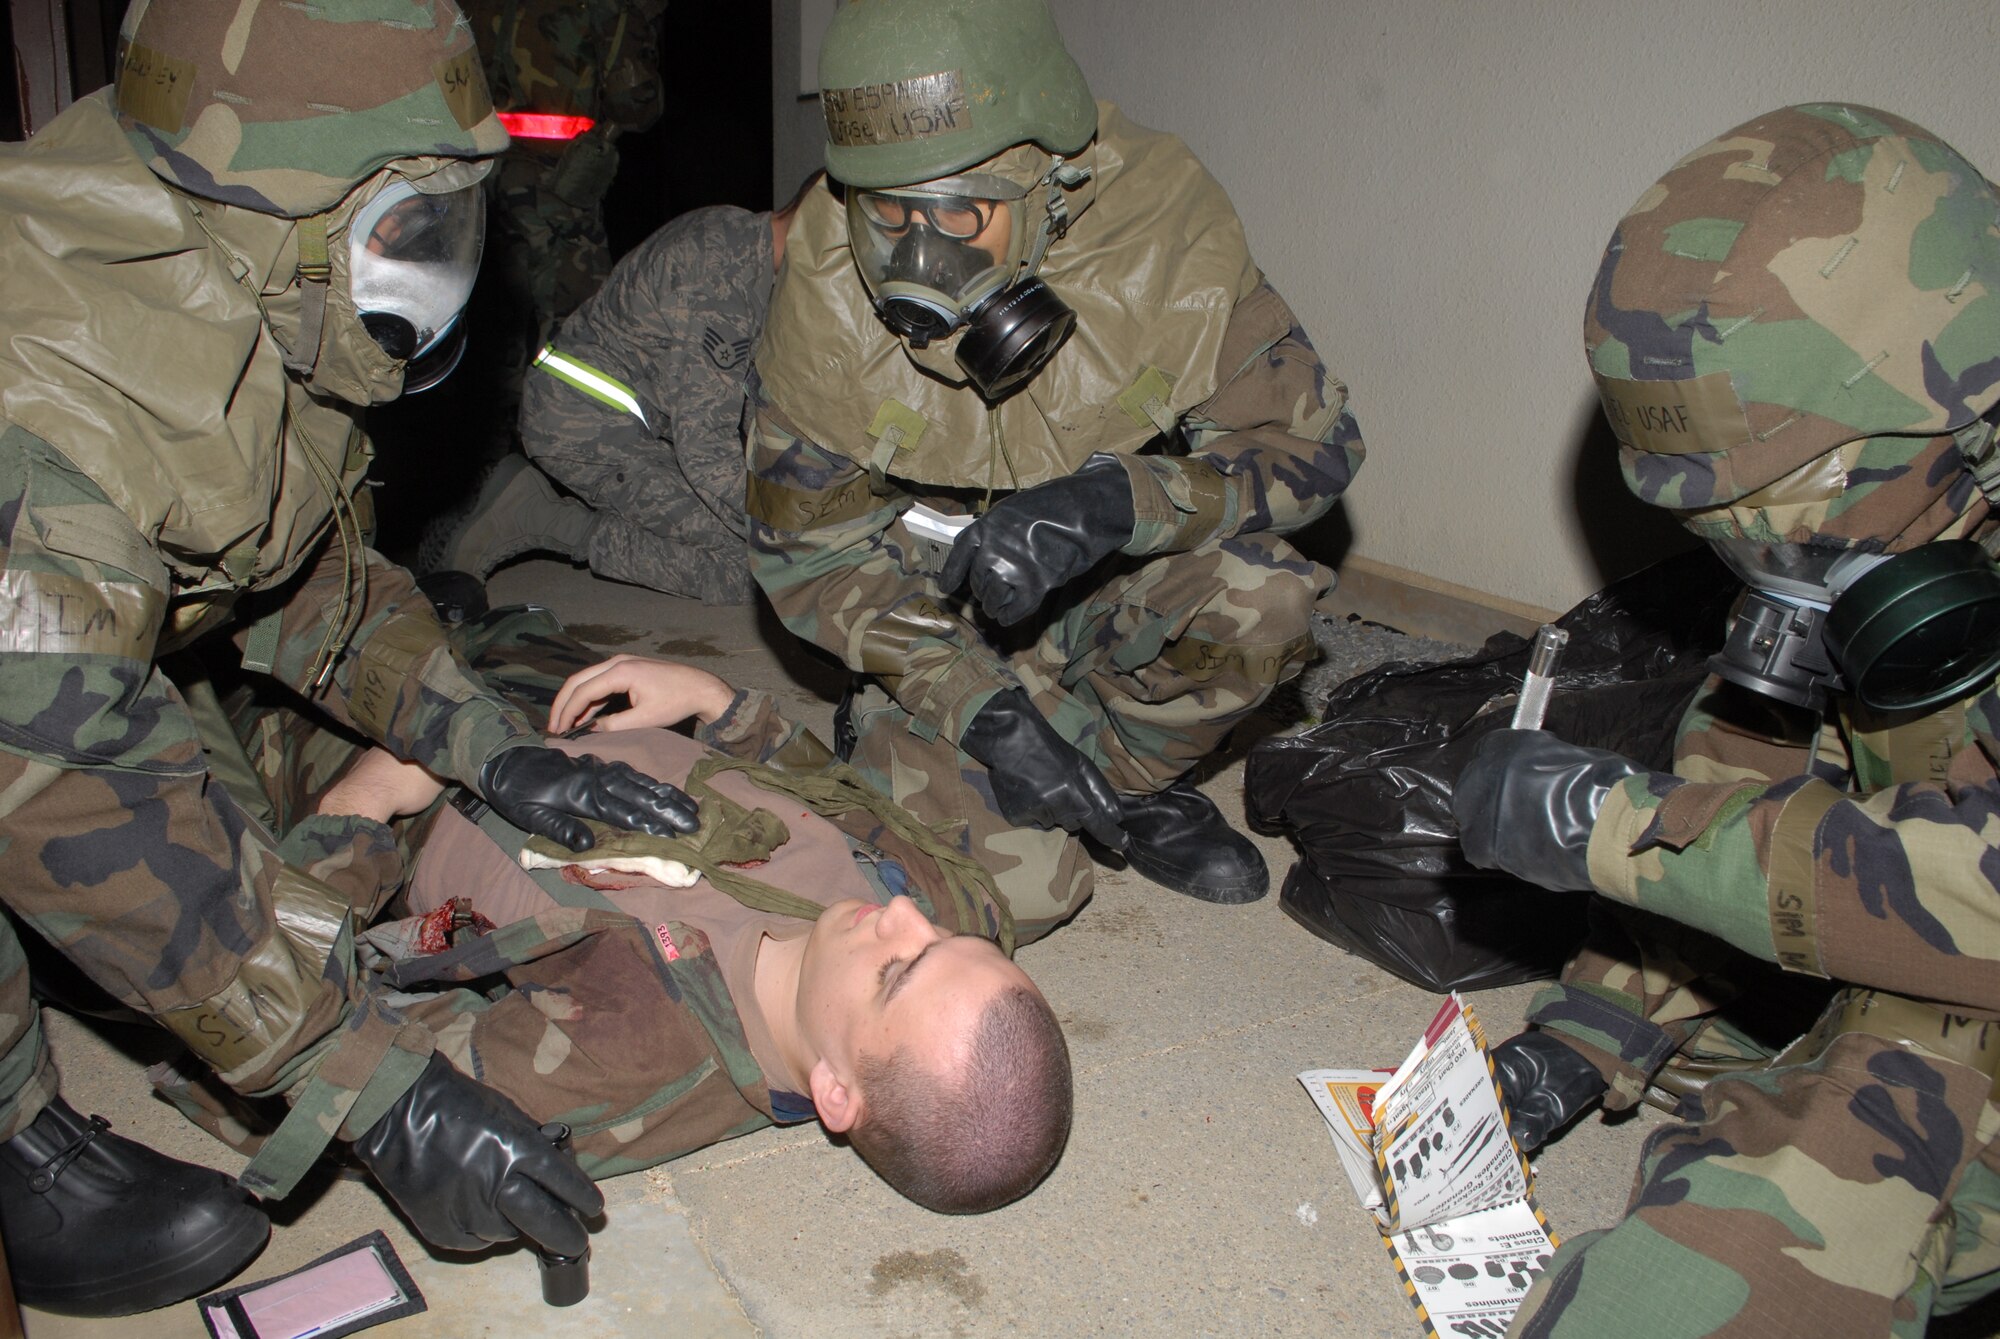 Airmen from the 961st Airborne Air Control Squadron, perform Self-aid and Buddy Care on Airman Christopher Leonard, 18th Medical Operations Squadron, for his lacerations to his arm and chest, after an attack scenario during local operational readiness exercise Beverly High 08-4 at Kadena Air Base, Japan, Feb. 14, 2008. The 18th Wing conducted the exercise from Feb. 10 to 15 to test Airmen's ability to respond in contingency situations. (U.S. Air Force photo/Staff Sgt. Chrissy FitzGerald)